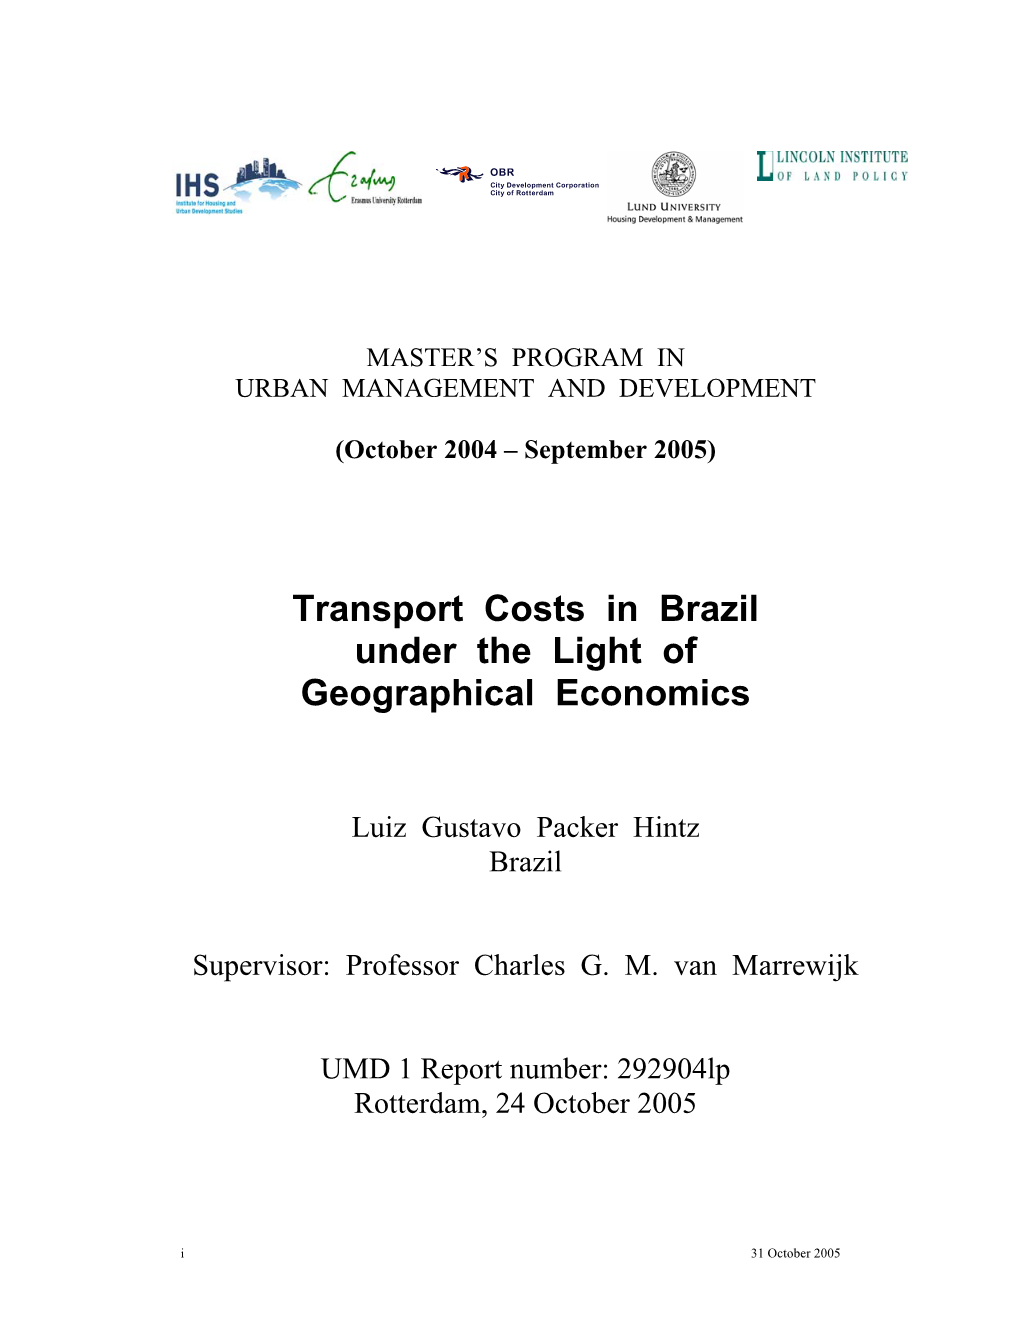 Transport Costs in Brazil Under the Light of Geographical Economics